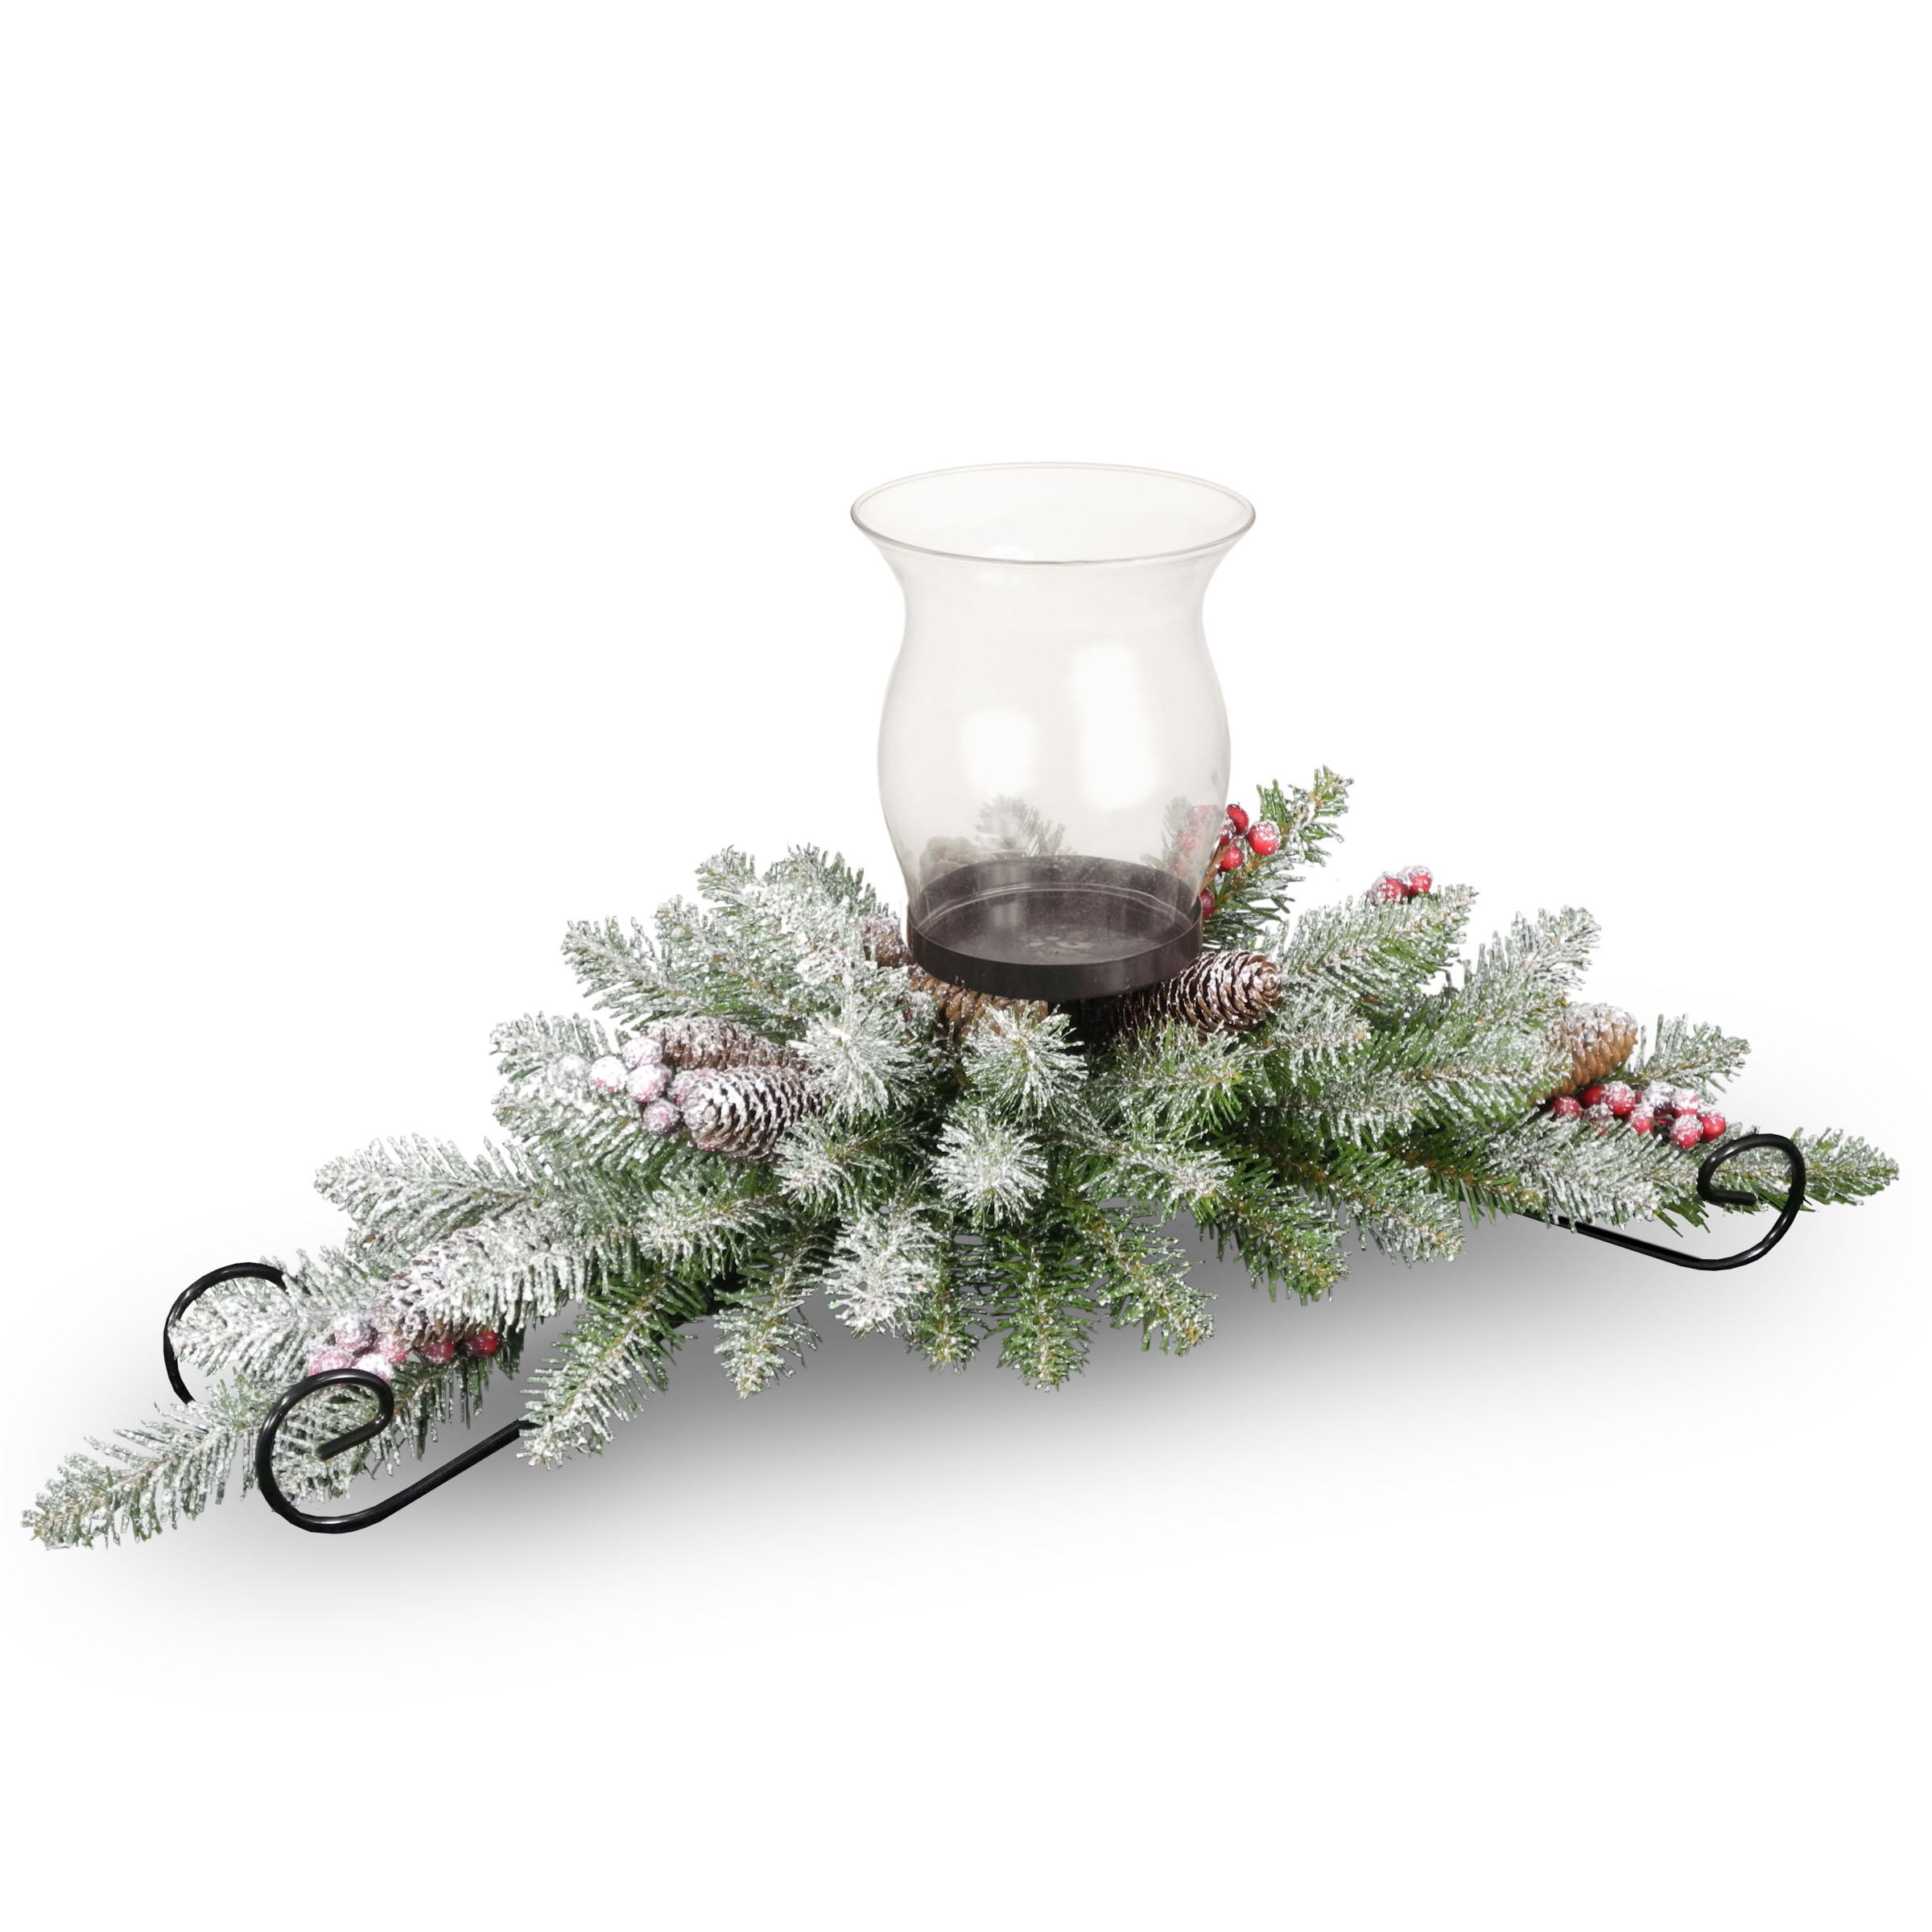 30 Inch Dunhill Fir Snowy Centerpiece: Candle Holder, Cones & Berries